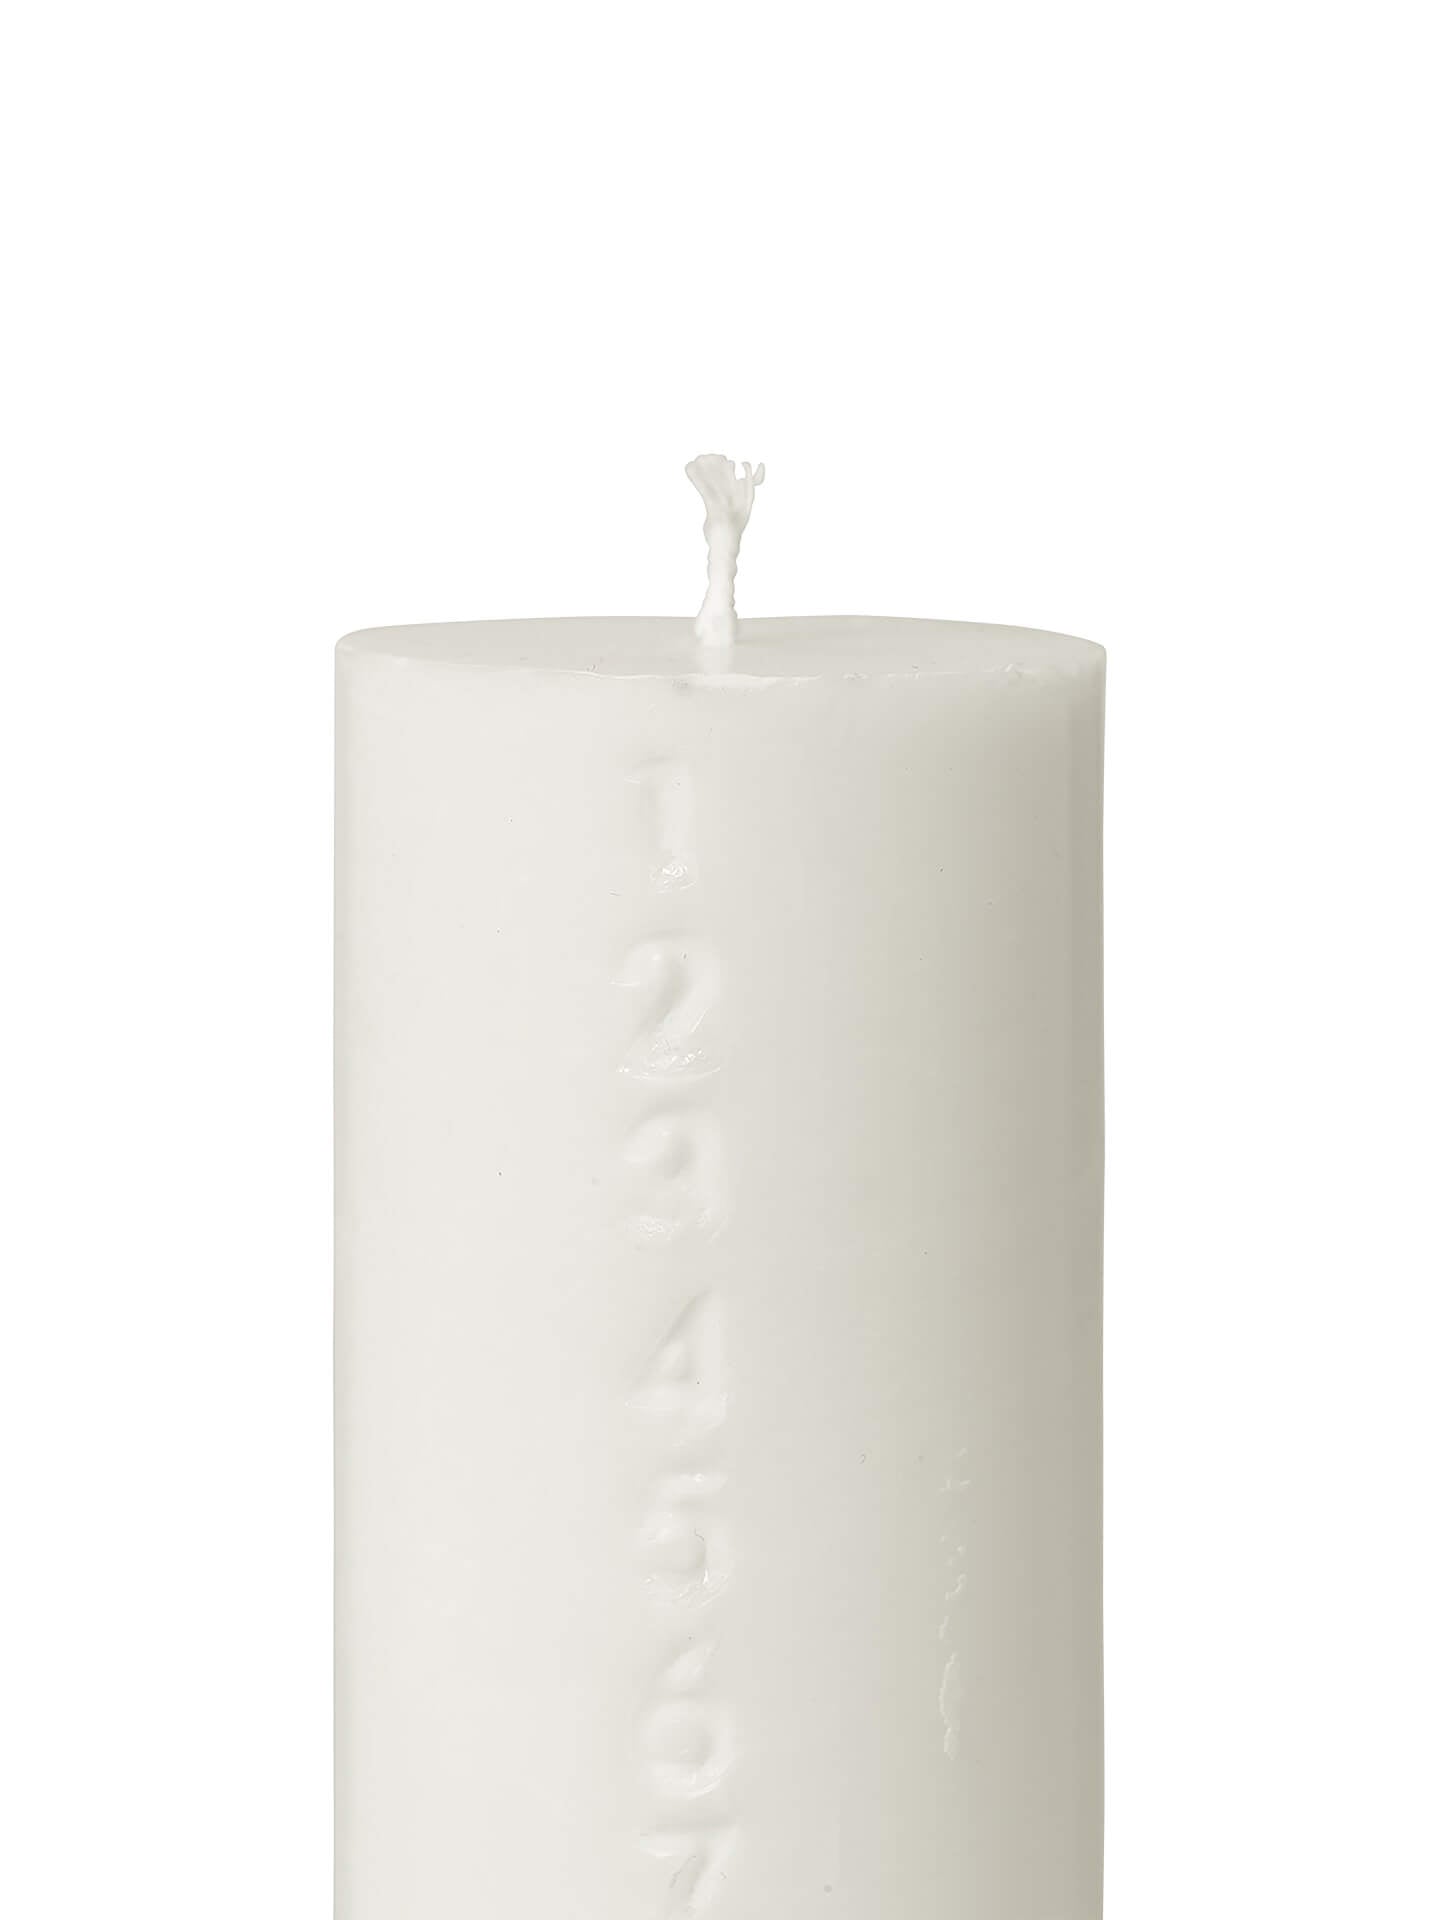 Pure Advent Candle | Snow White | by ferm Living - Lifestory - ferm LIVING